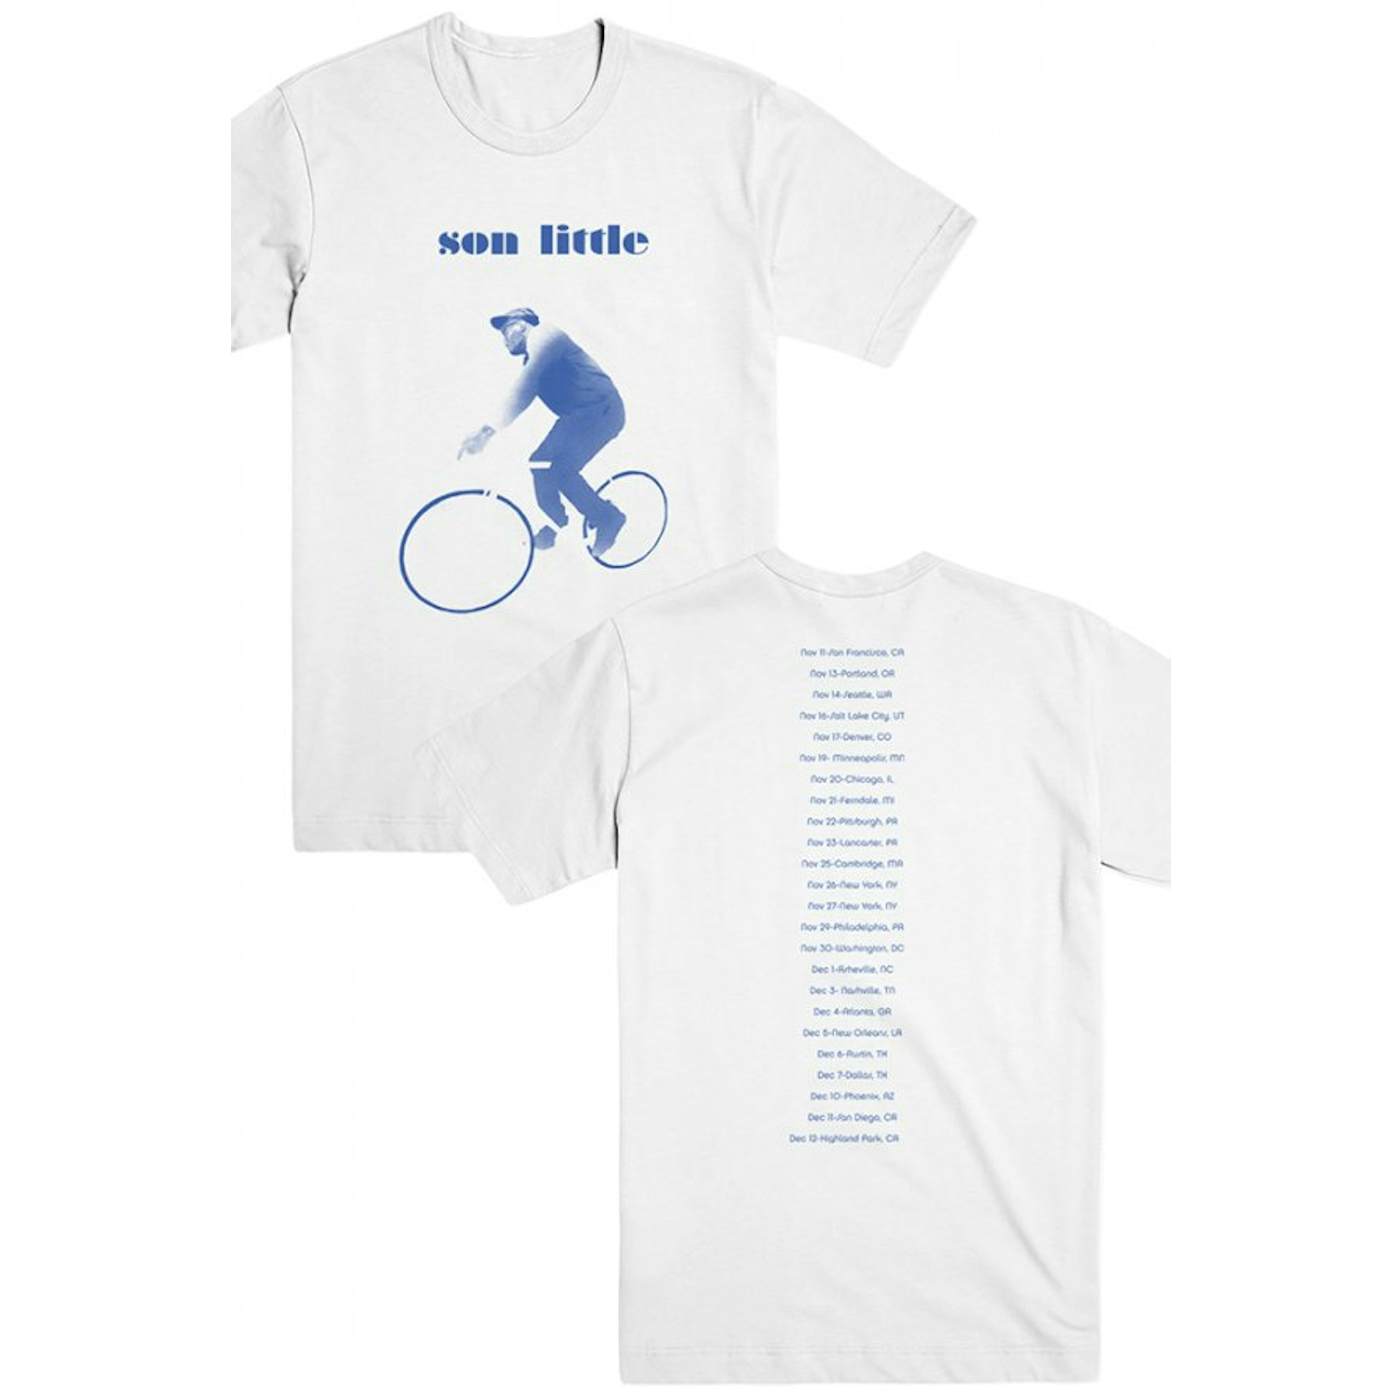 Son Little Invisible Tour Tee